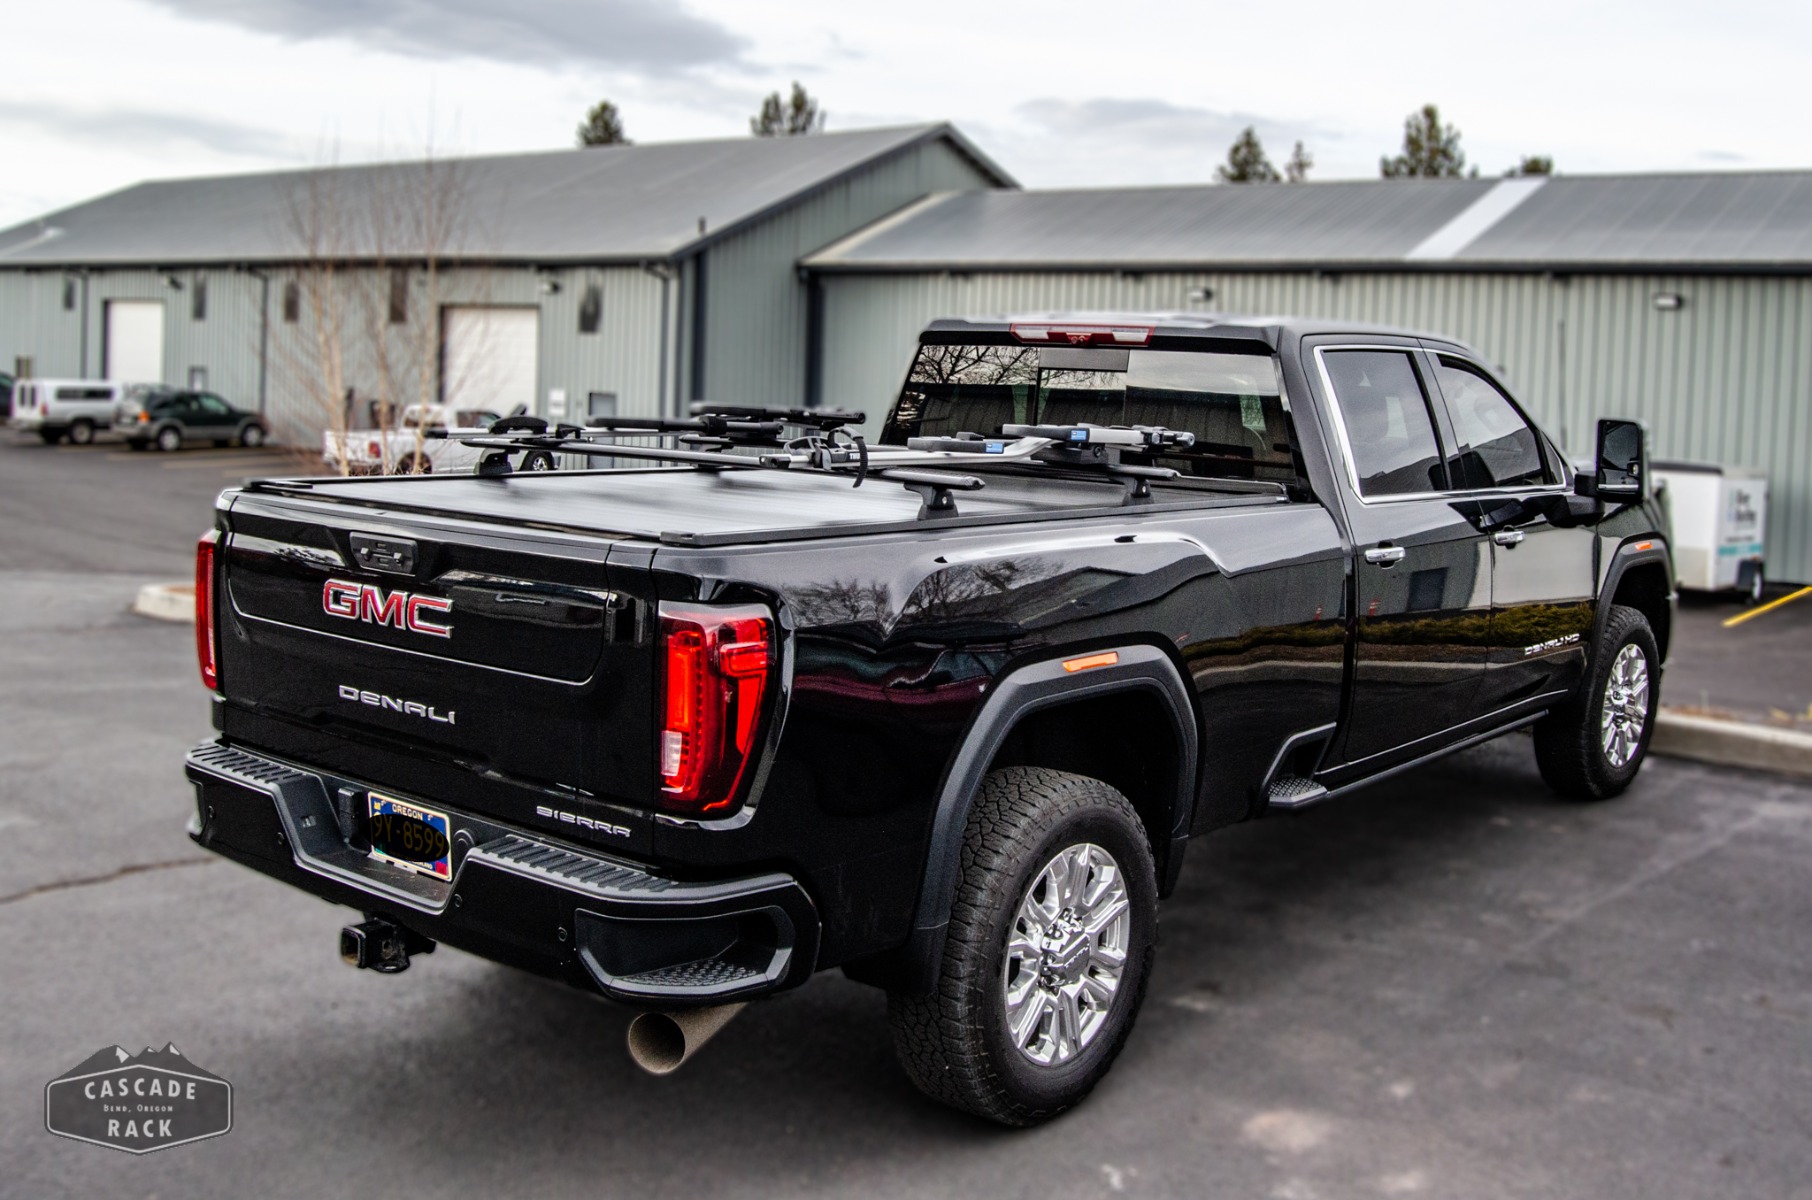 Fishing Rod Holders : A.R.E. Truck Caps and Tonneau Covers